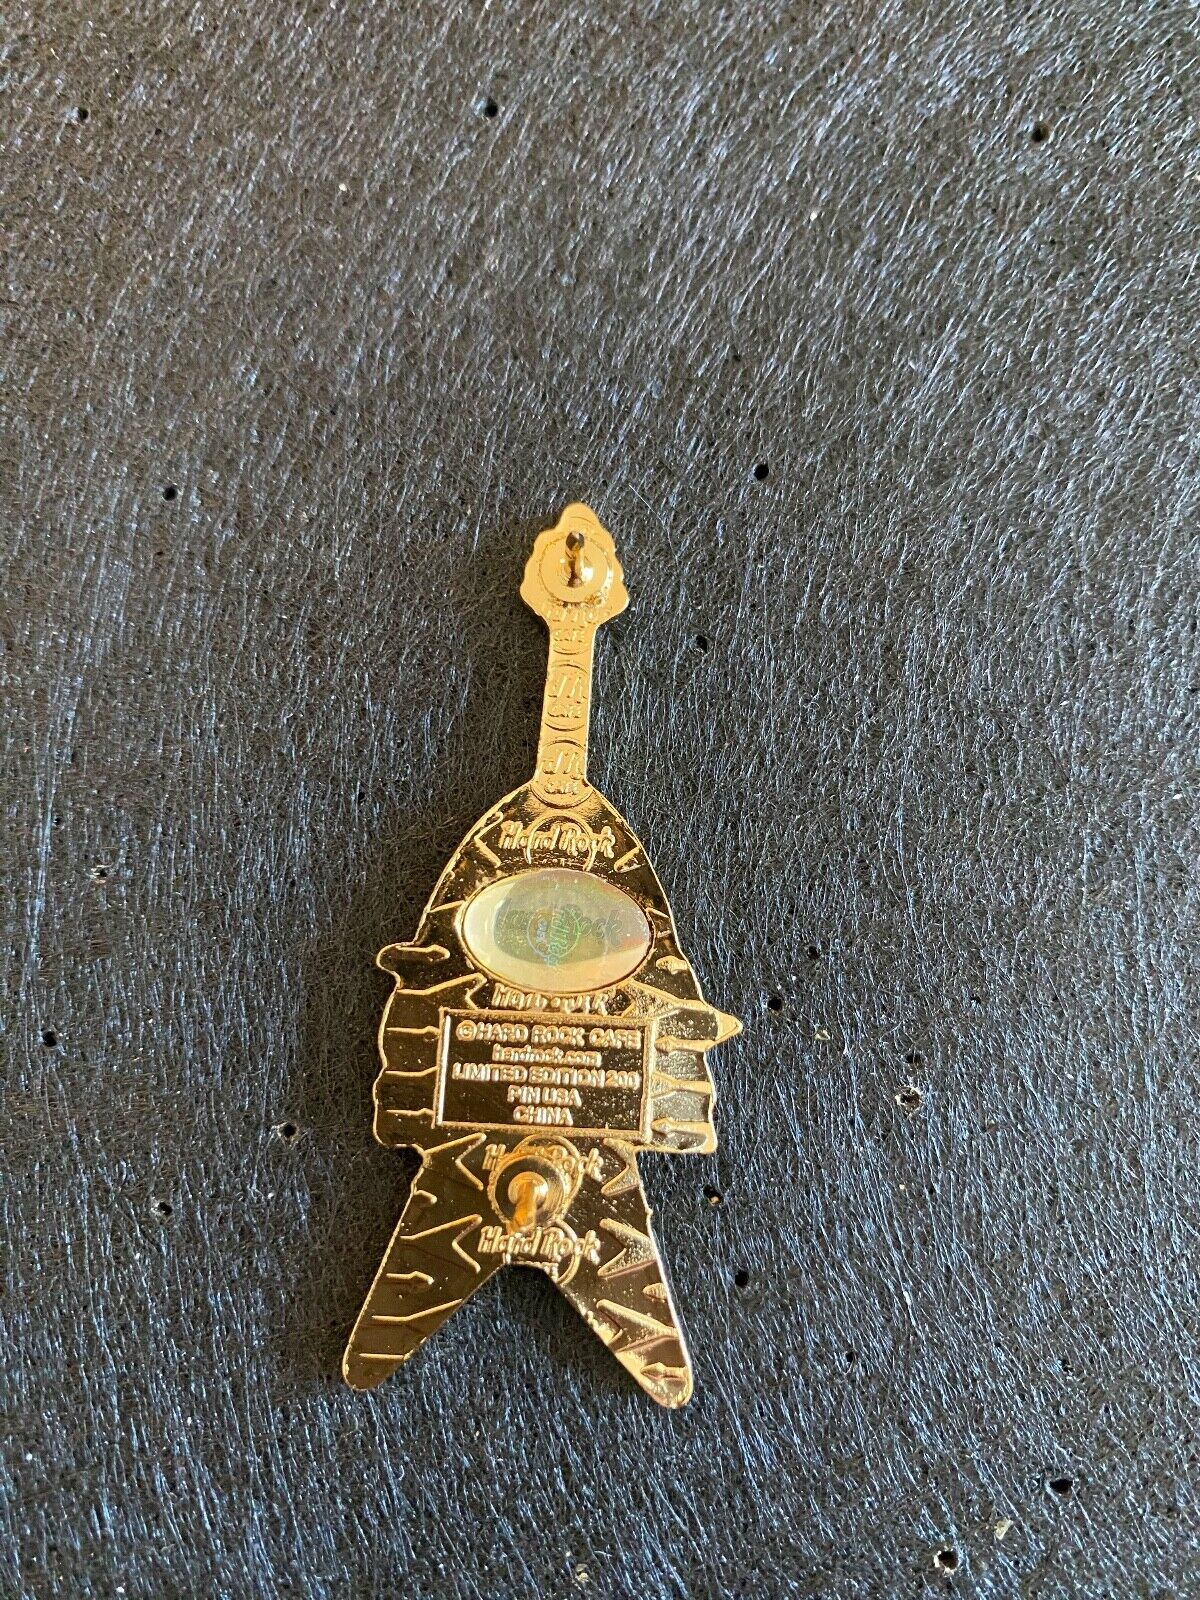 Hard Rock Cafe Collectable Pin